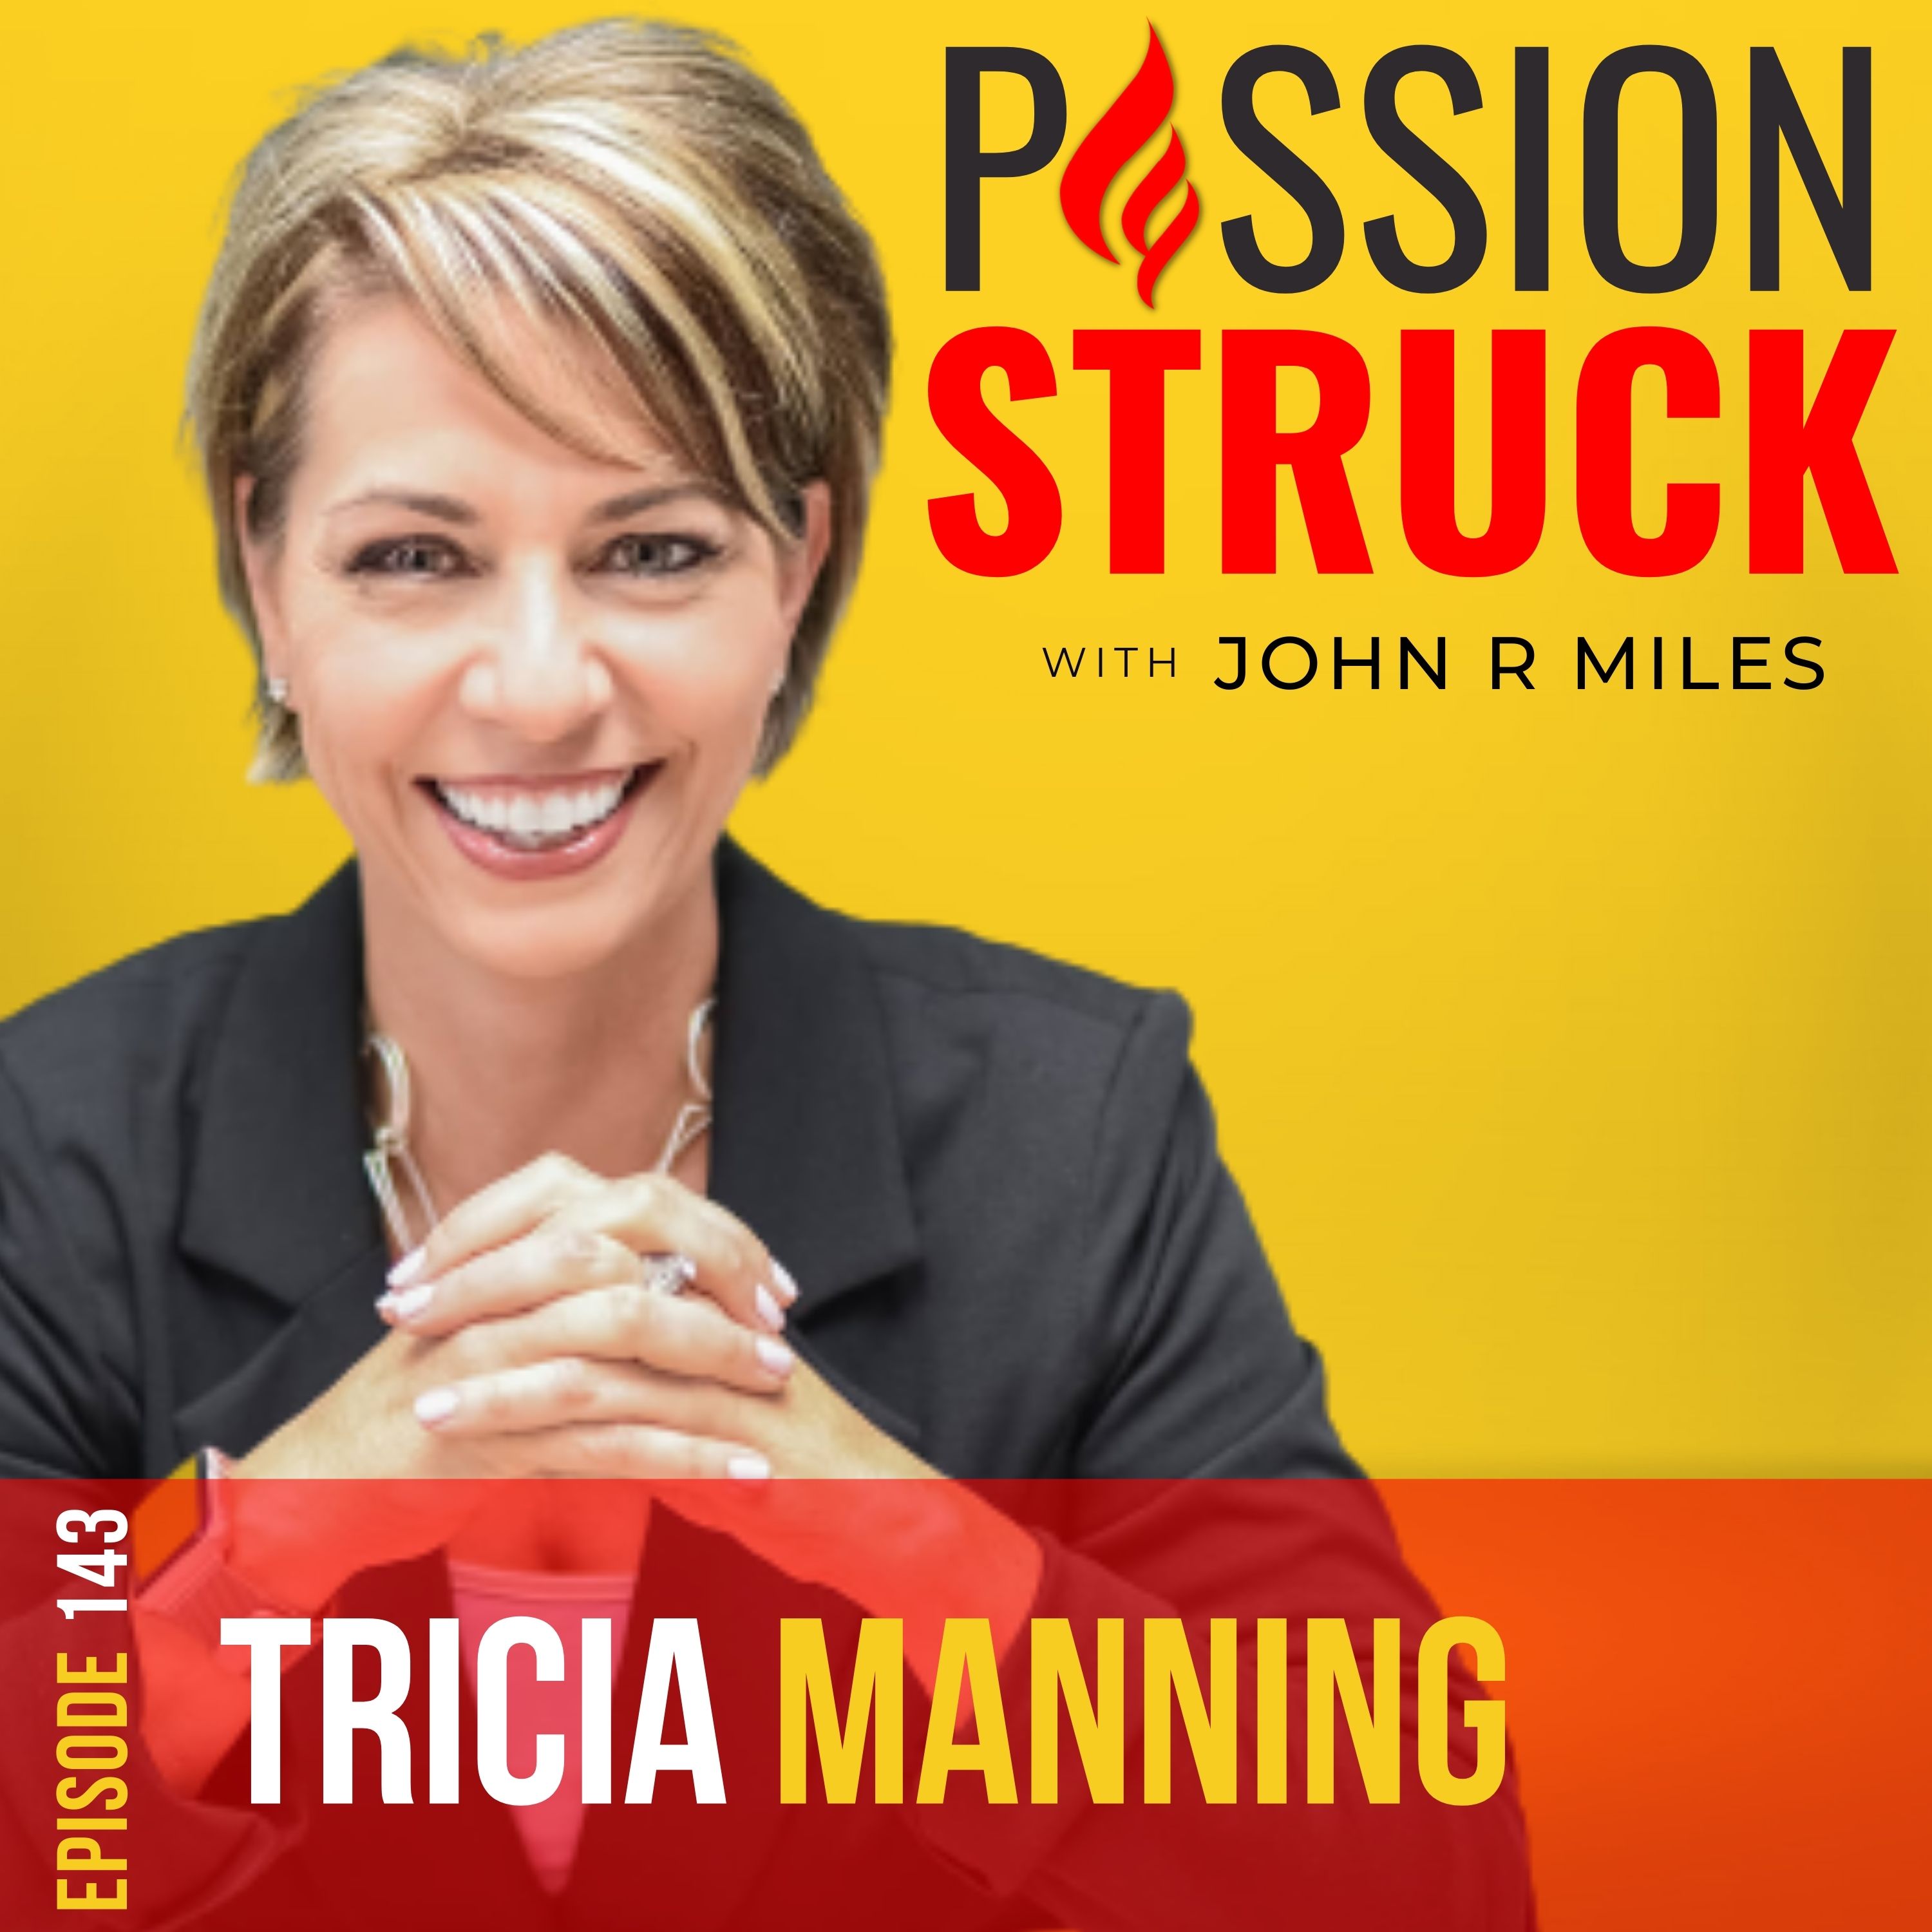 Passion Struck with John R. Miles episode 143 album cover featuring Tricia Manning